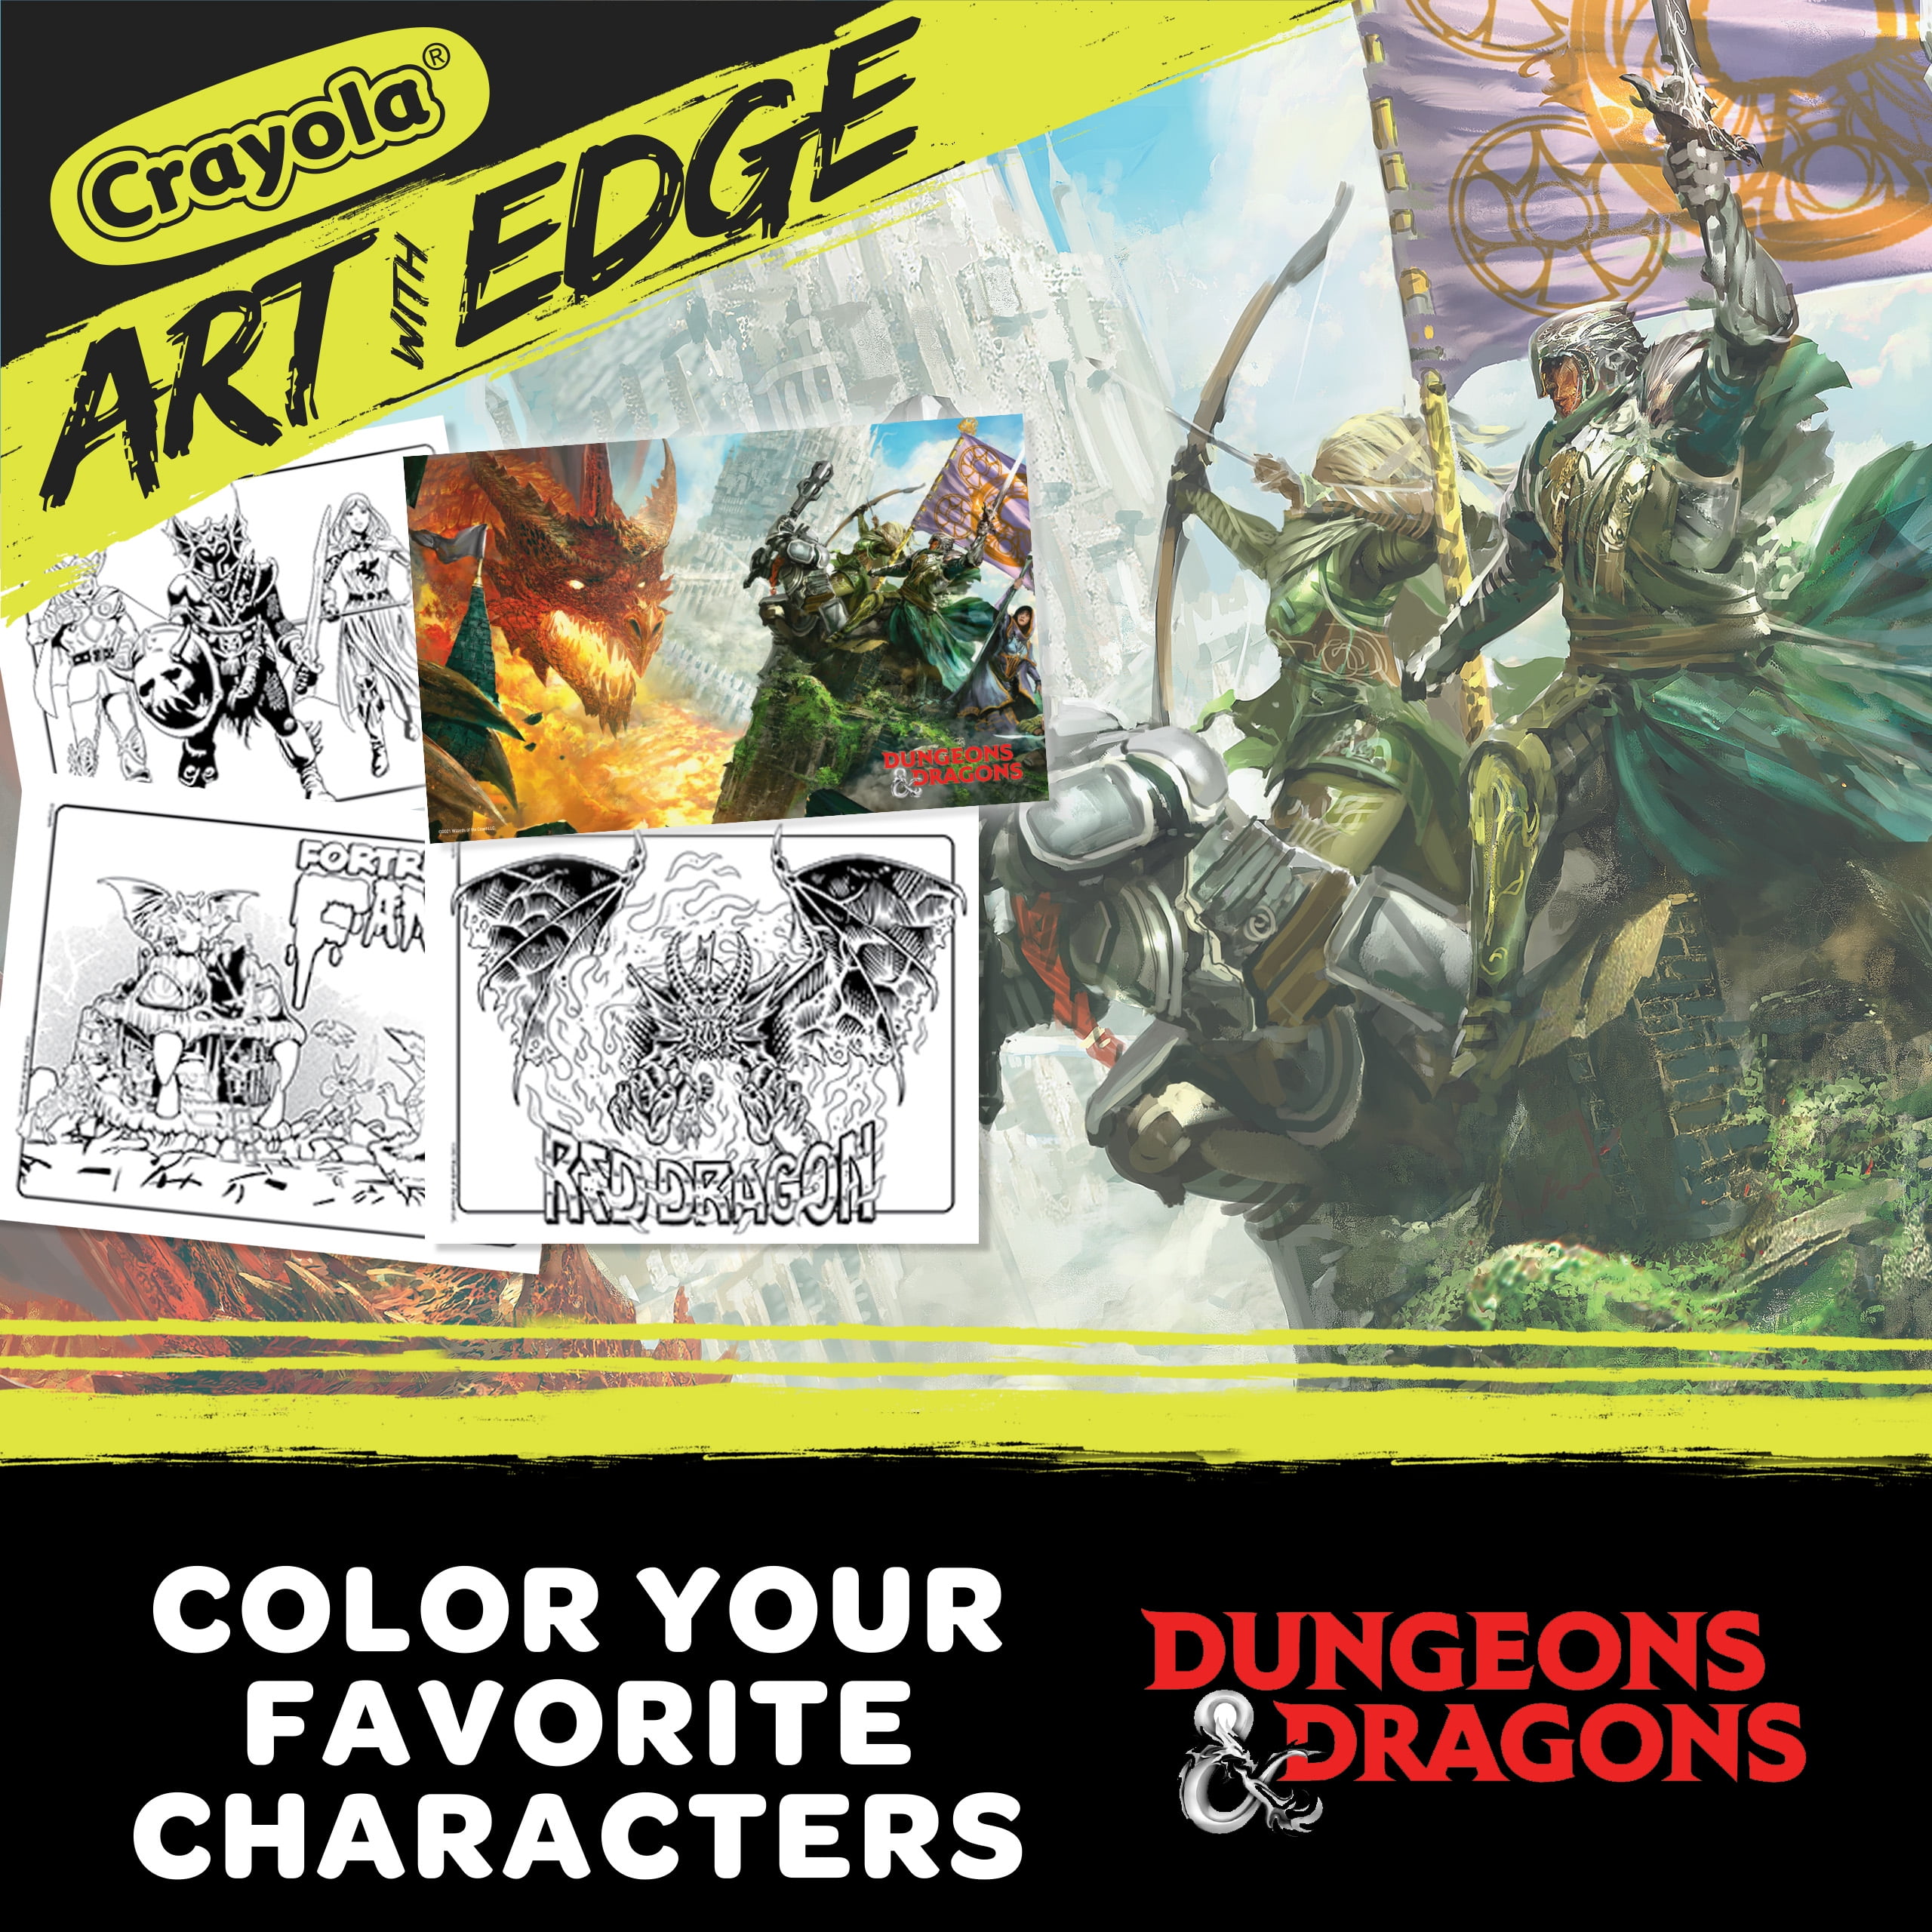 Art With Edge coloring books for tweens and teens makes coloring cool.